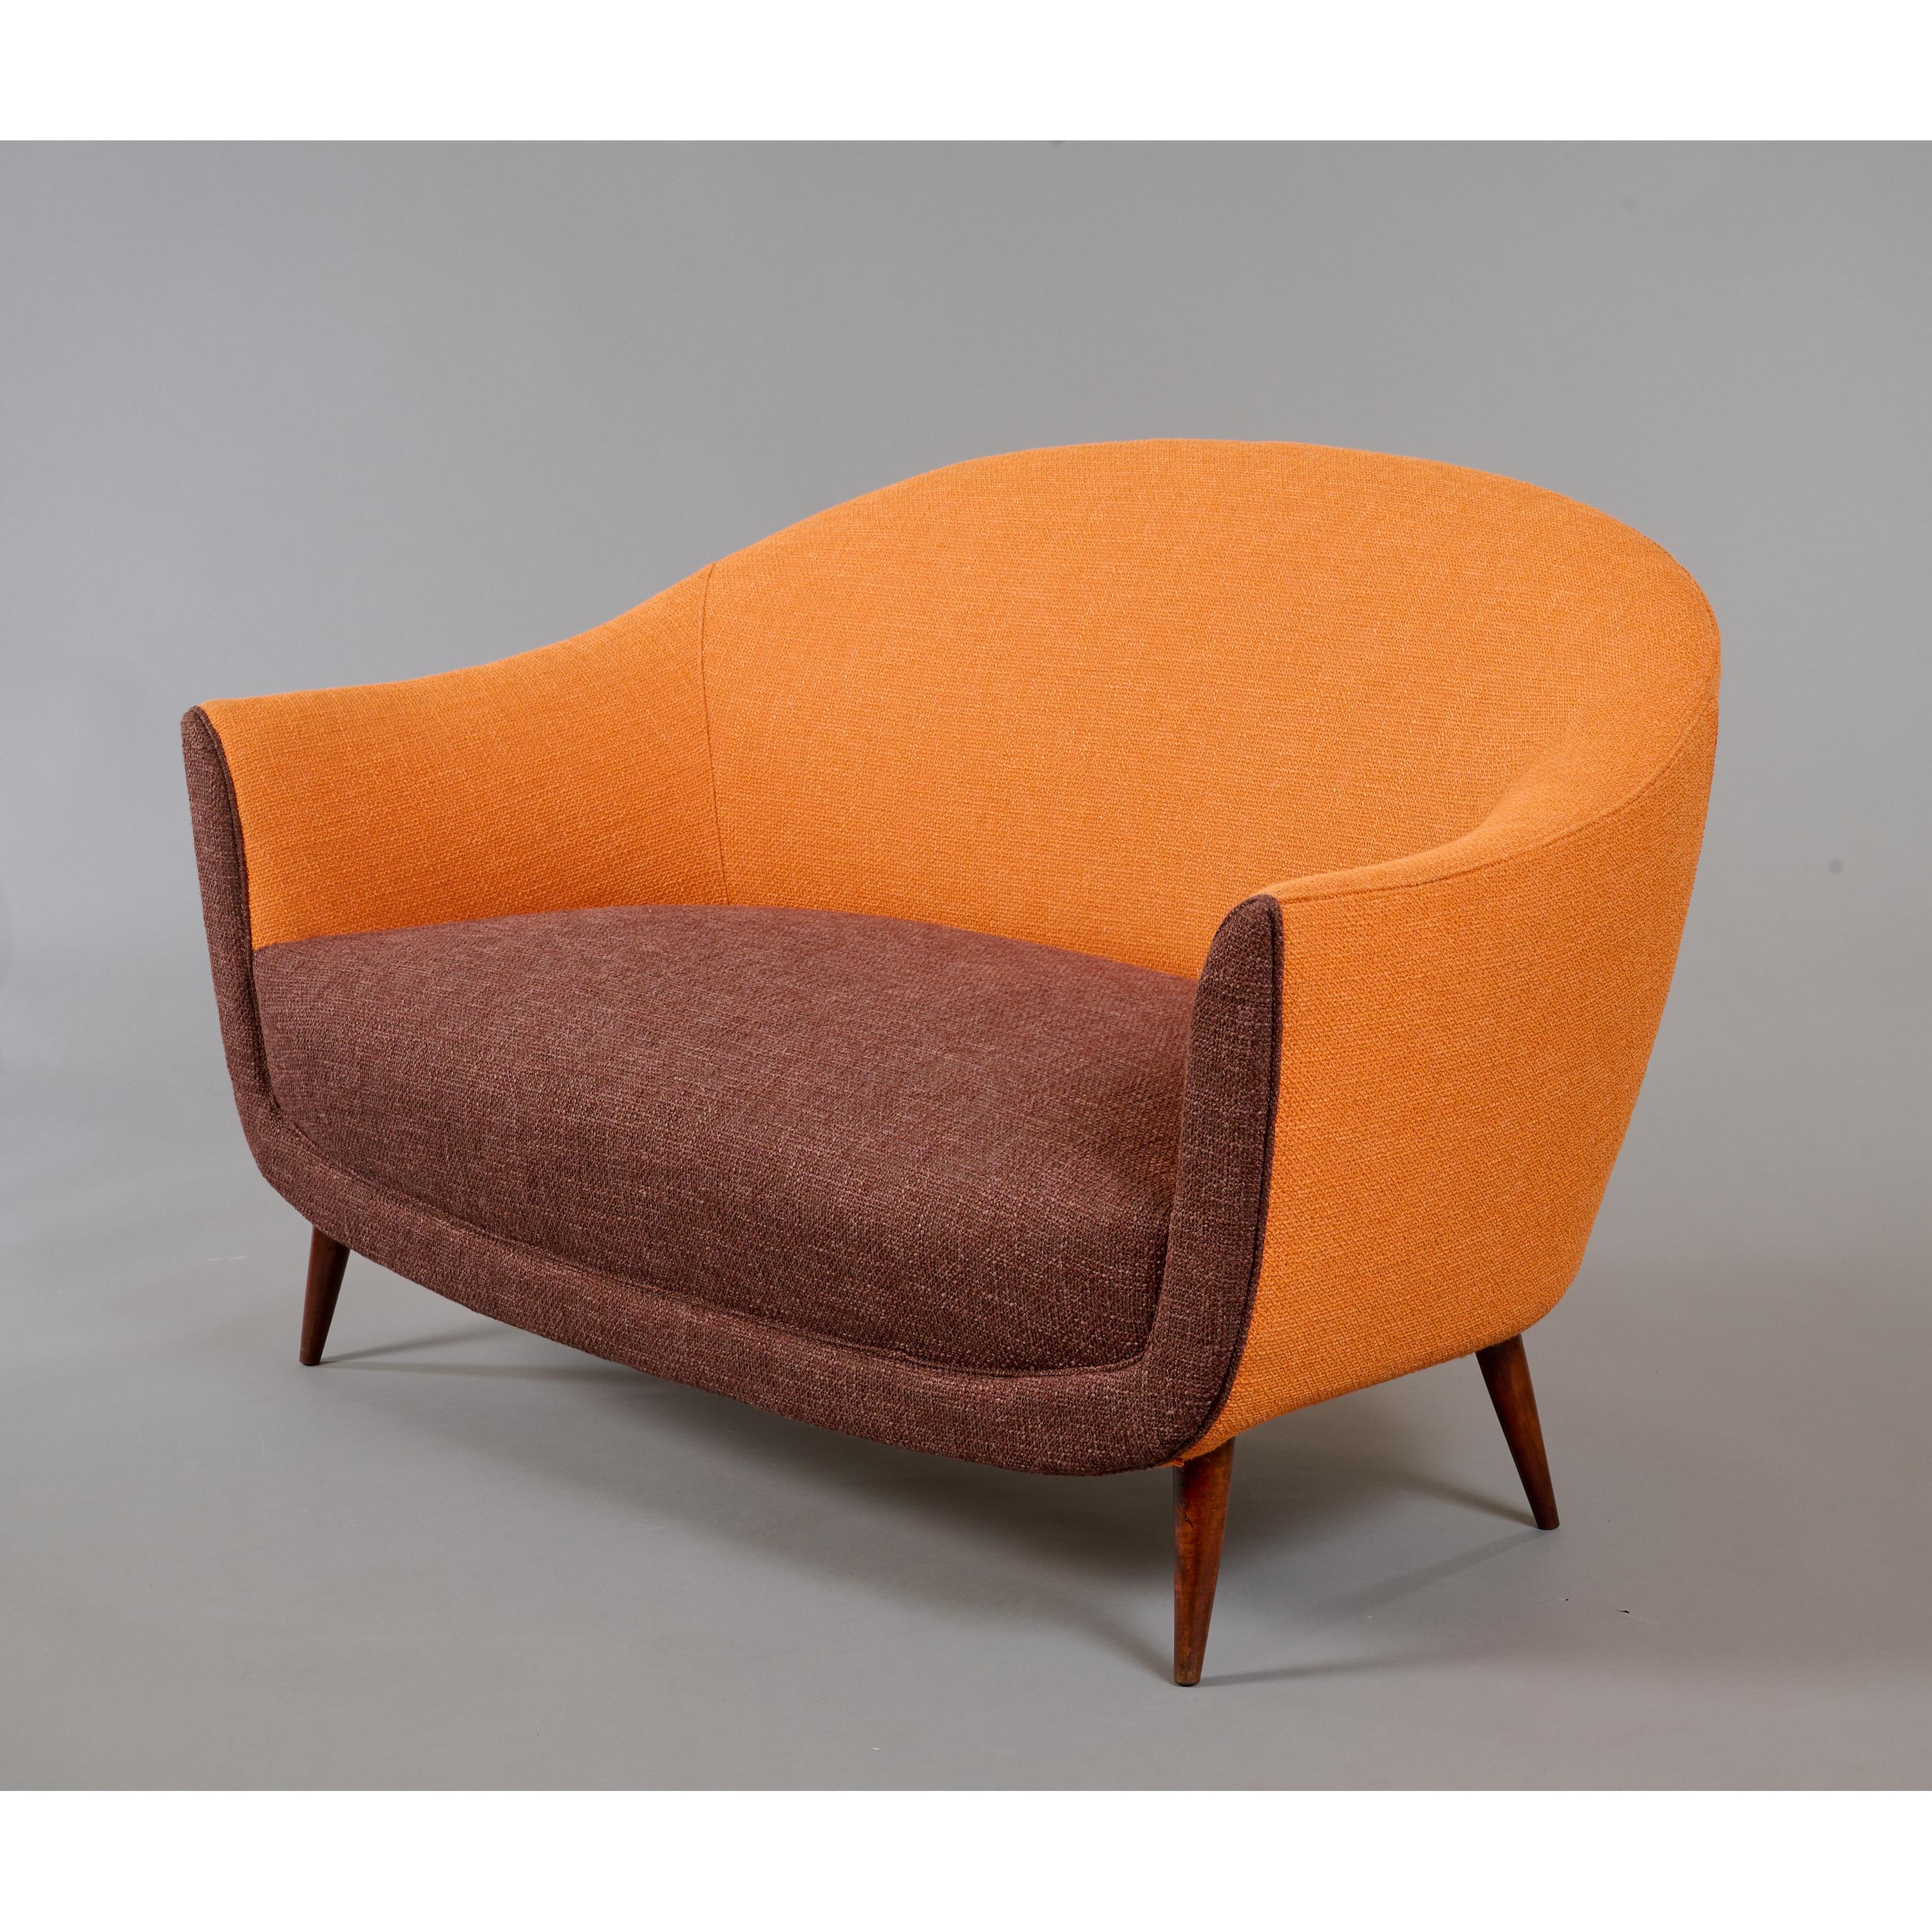 Curved ITSO Federico Munari Settee in Wood with Orange Upholstery, Italy 1950s  In Good Condition For Sale In New York, NY